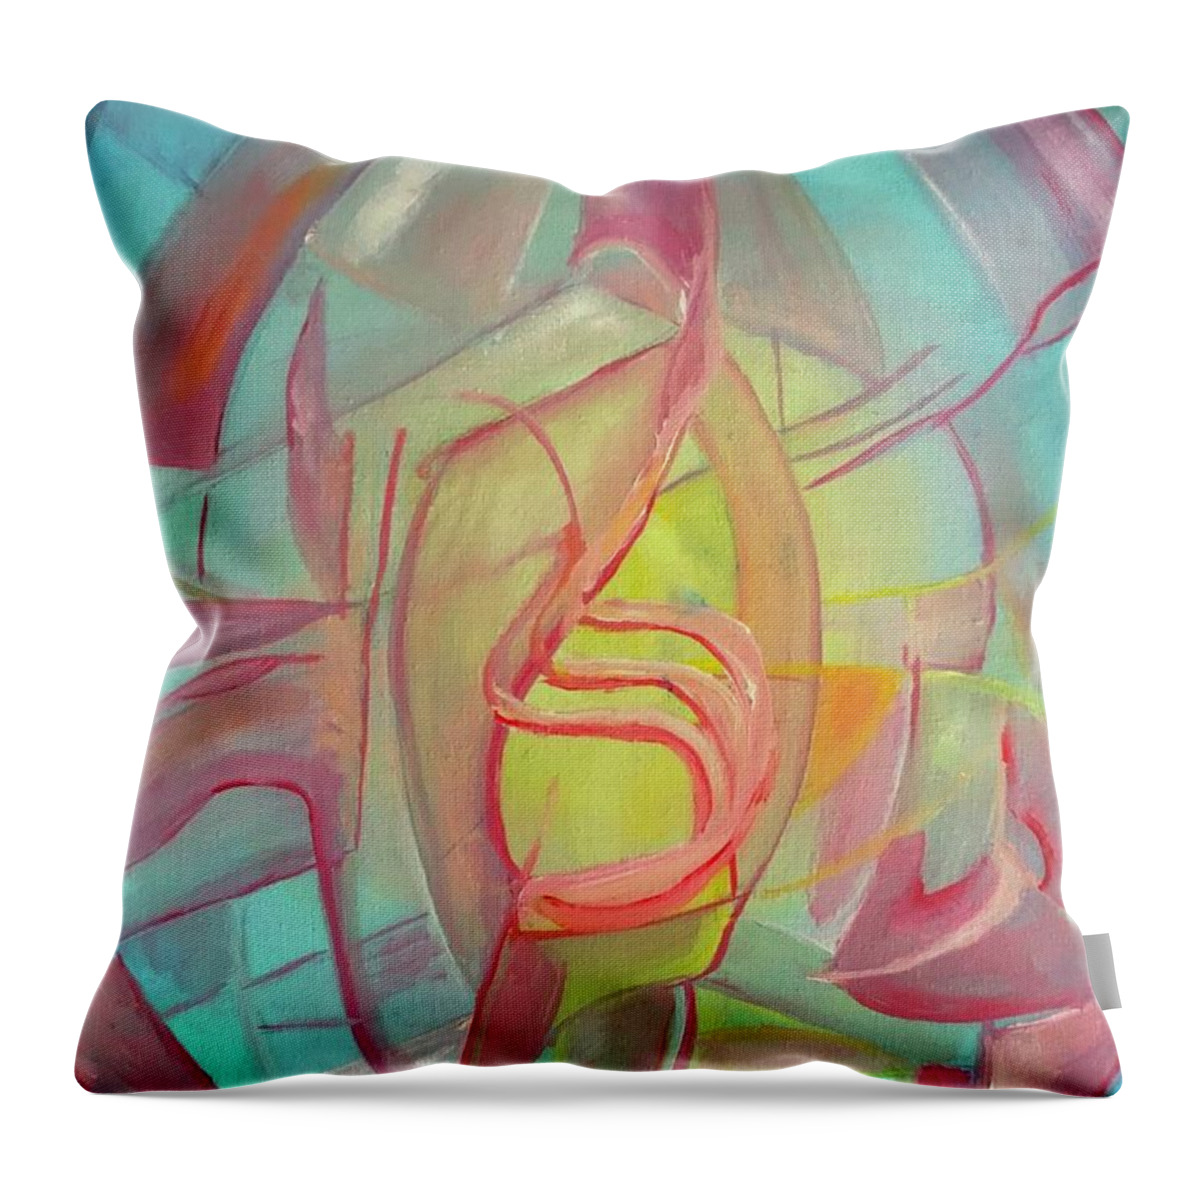 Beautiful Throw Pillow featuring the painting Lost by Medea Ioseliani